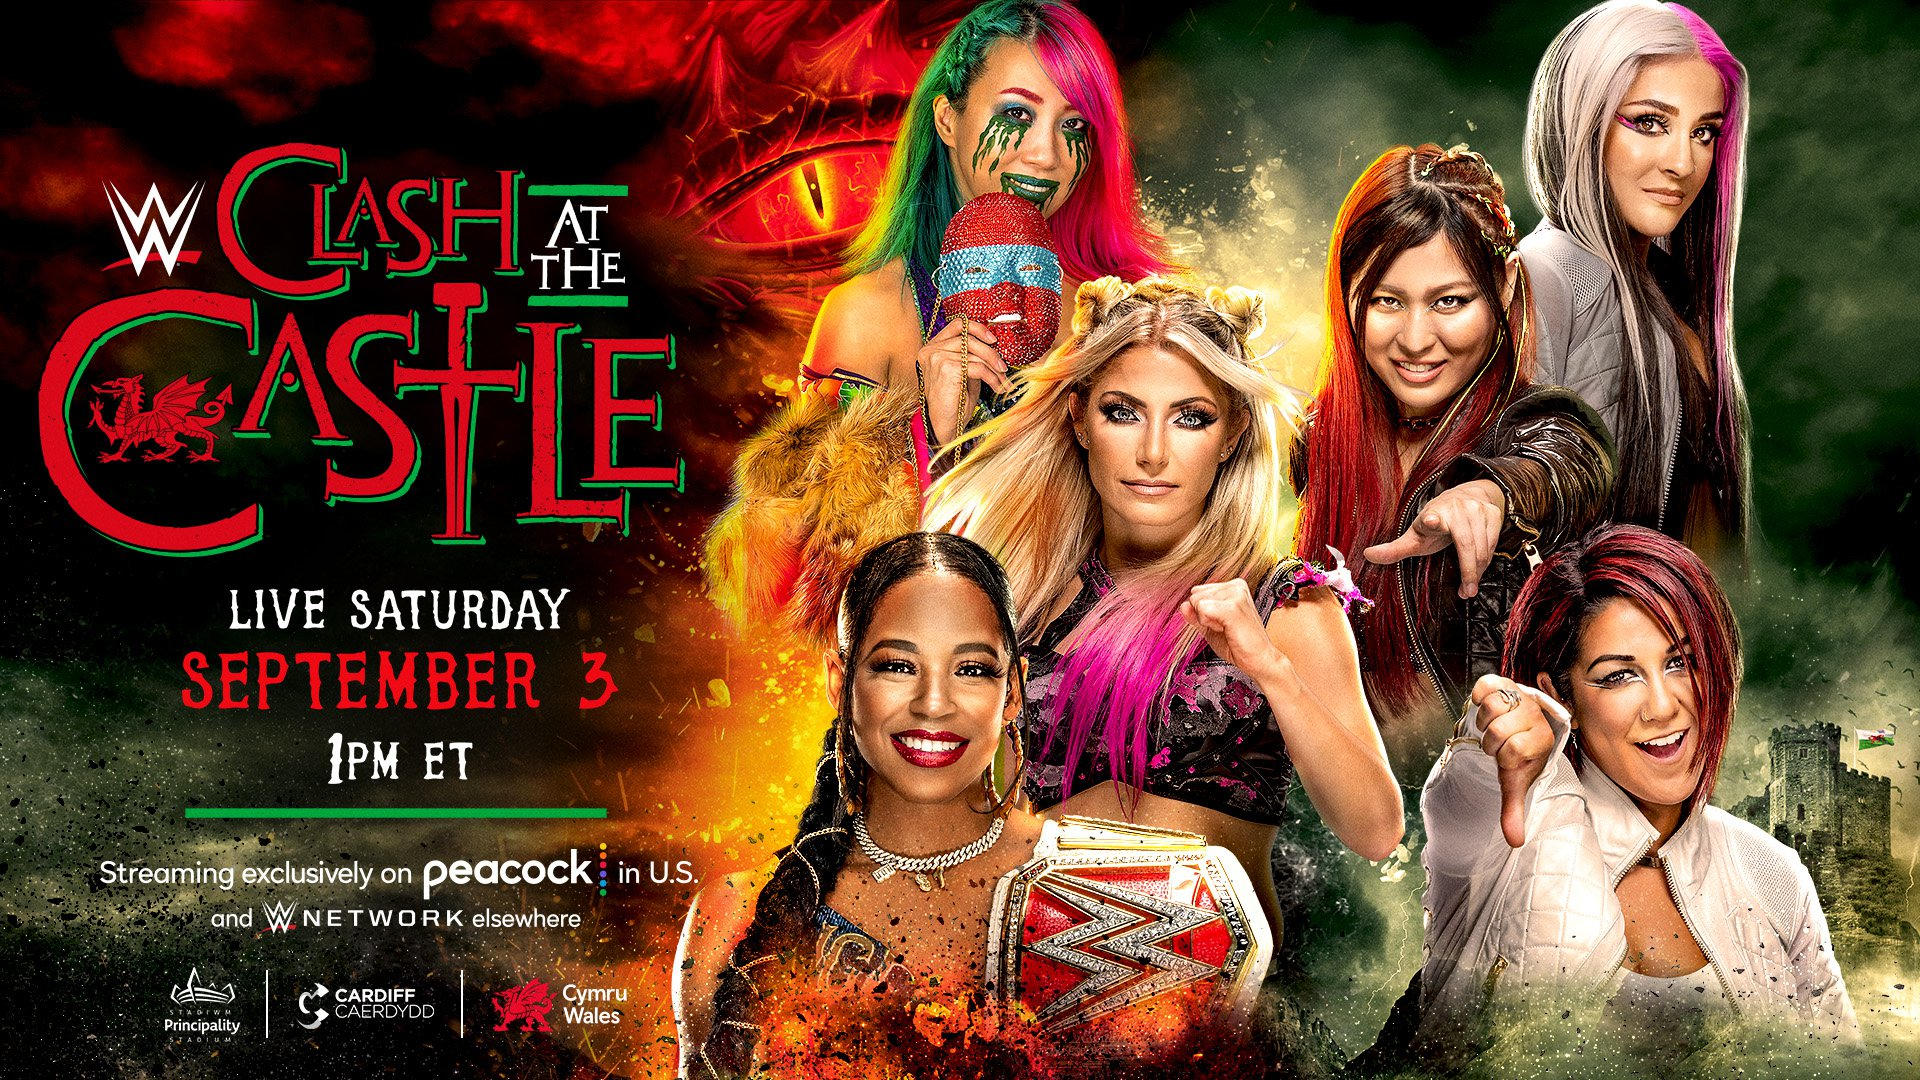 WWE Clash at the Castle Match CARD Revealed, check complete LIST